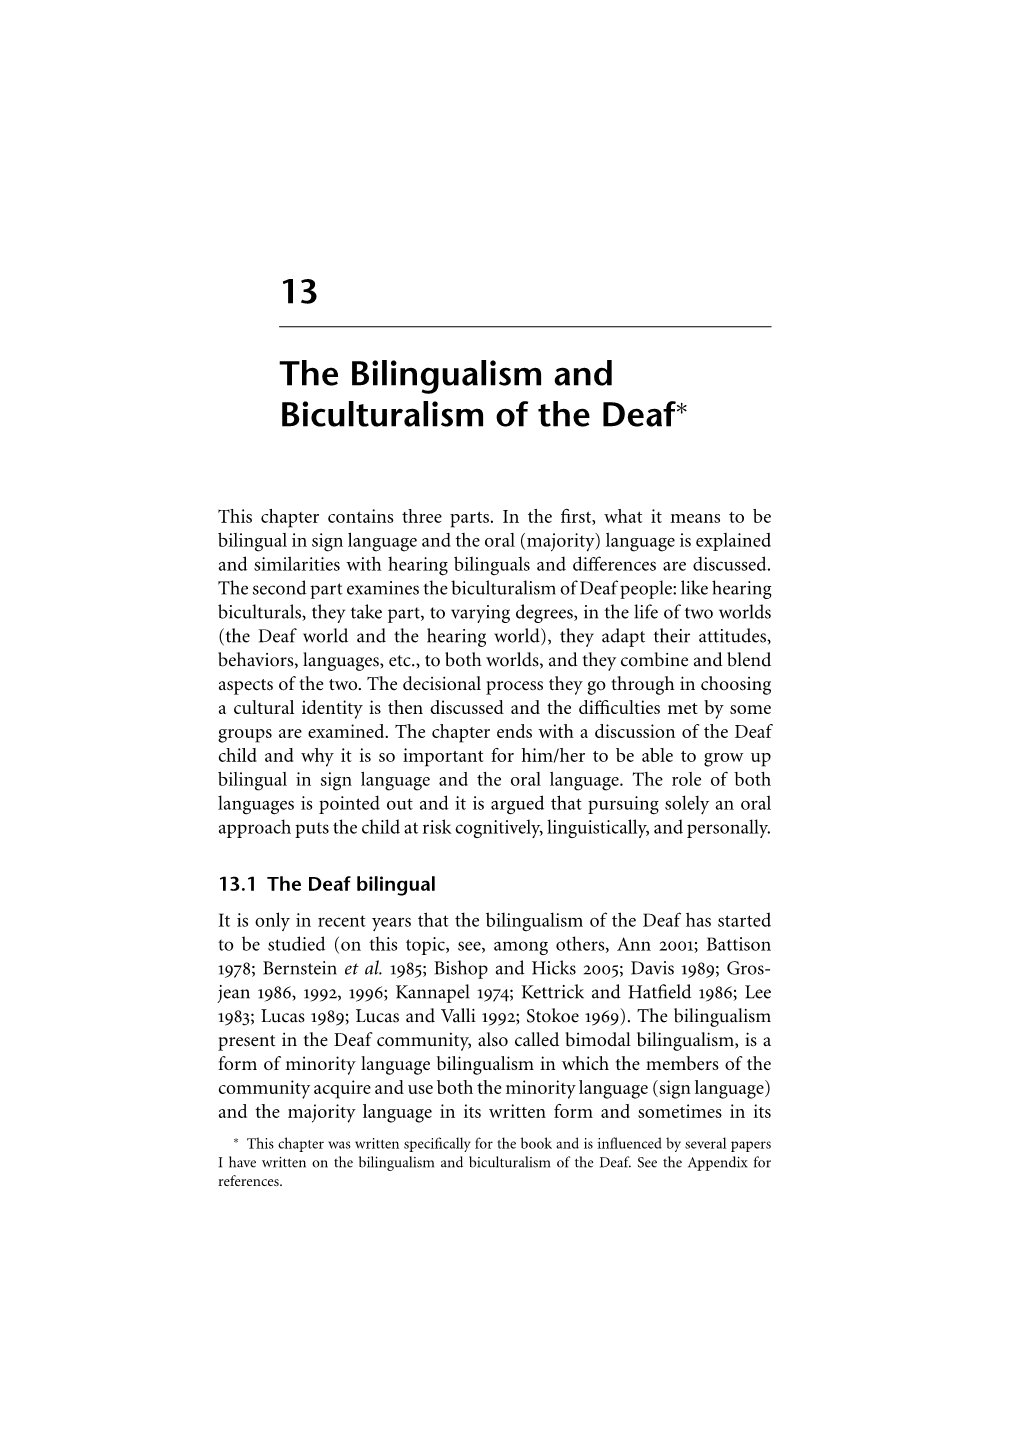 13 the Bilingualism and Biculturalism of the Deaf